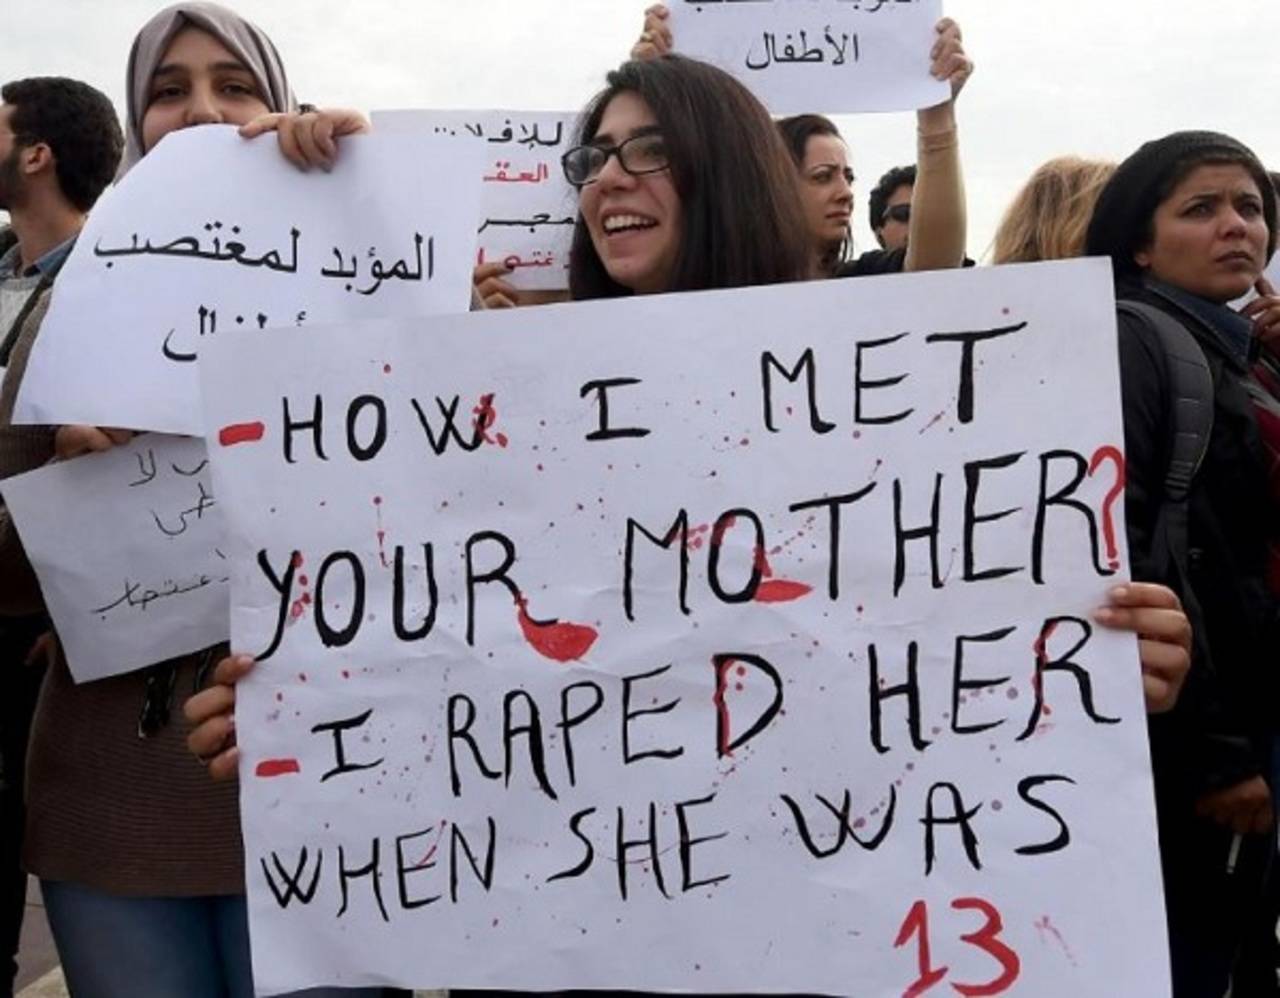 13-year-old Tunisian girl forced to marry step-brother who raped